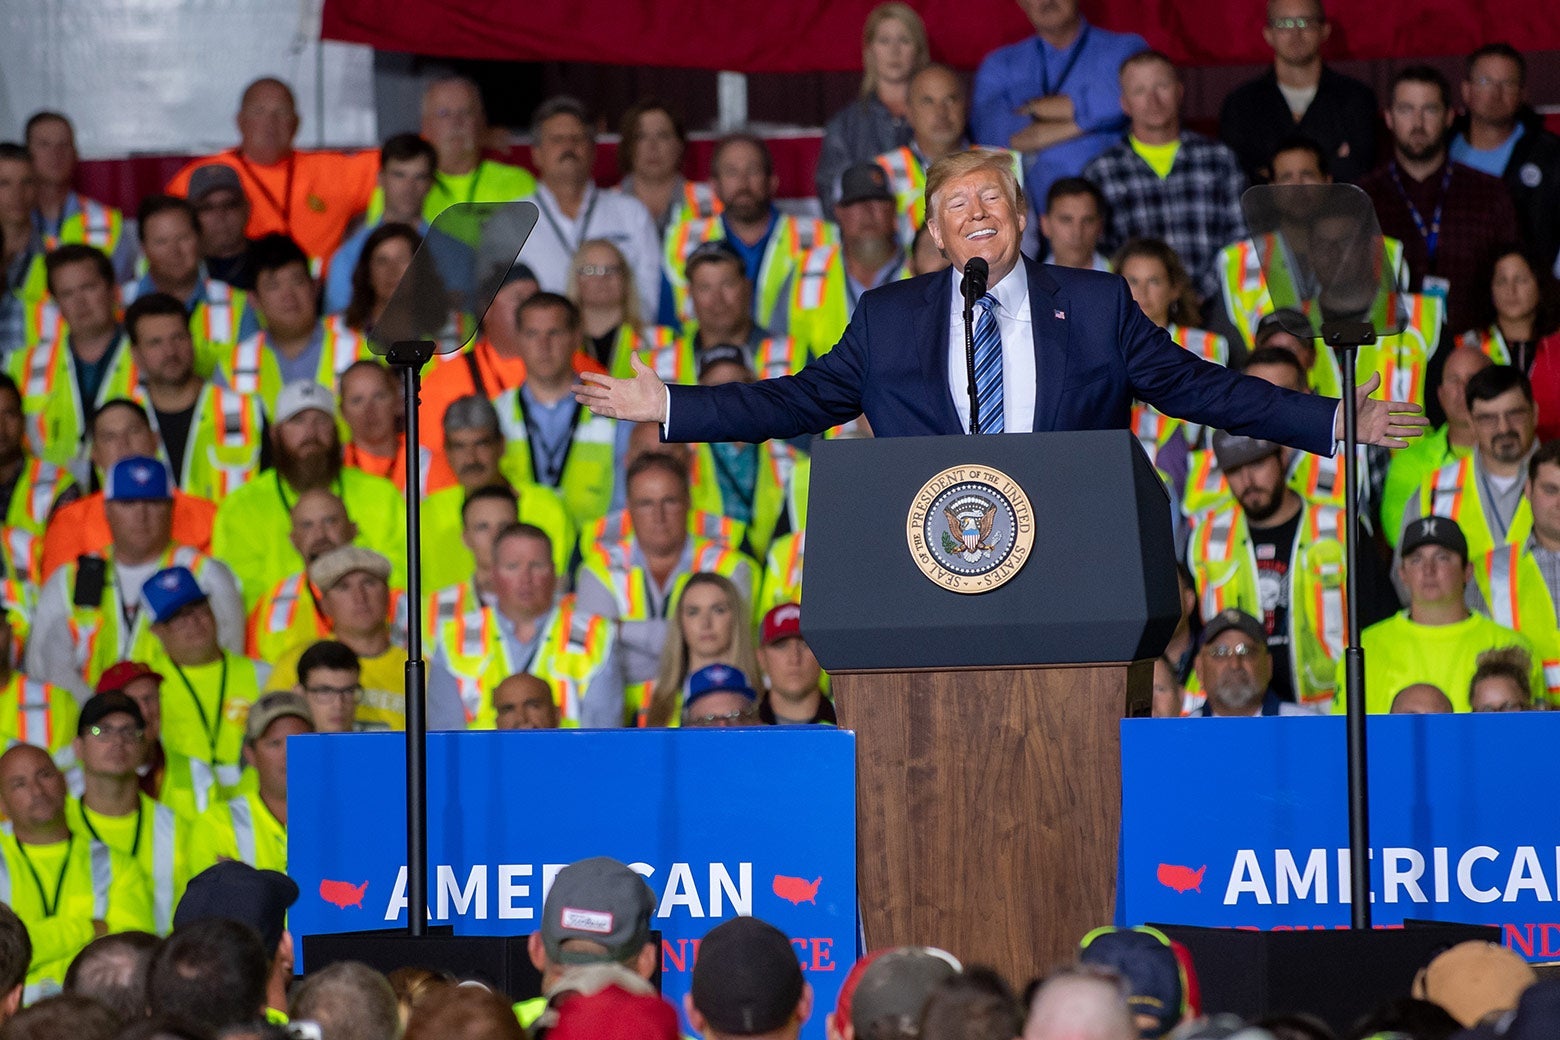 Trump speaking at a podium onstage with an audience of workers behind him.